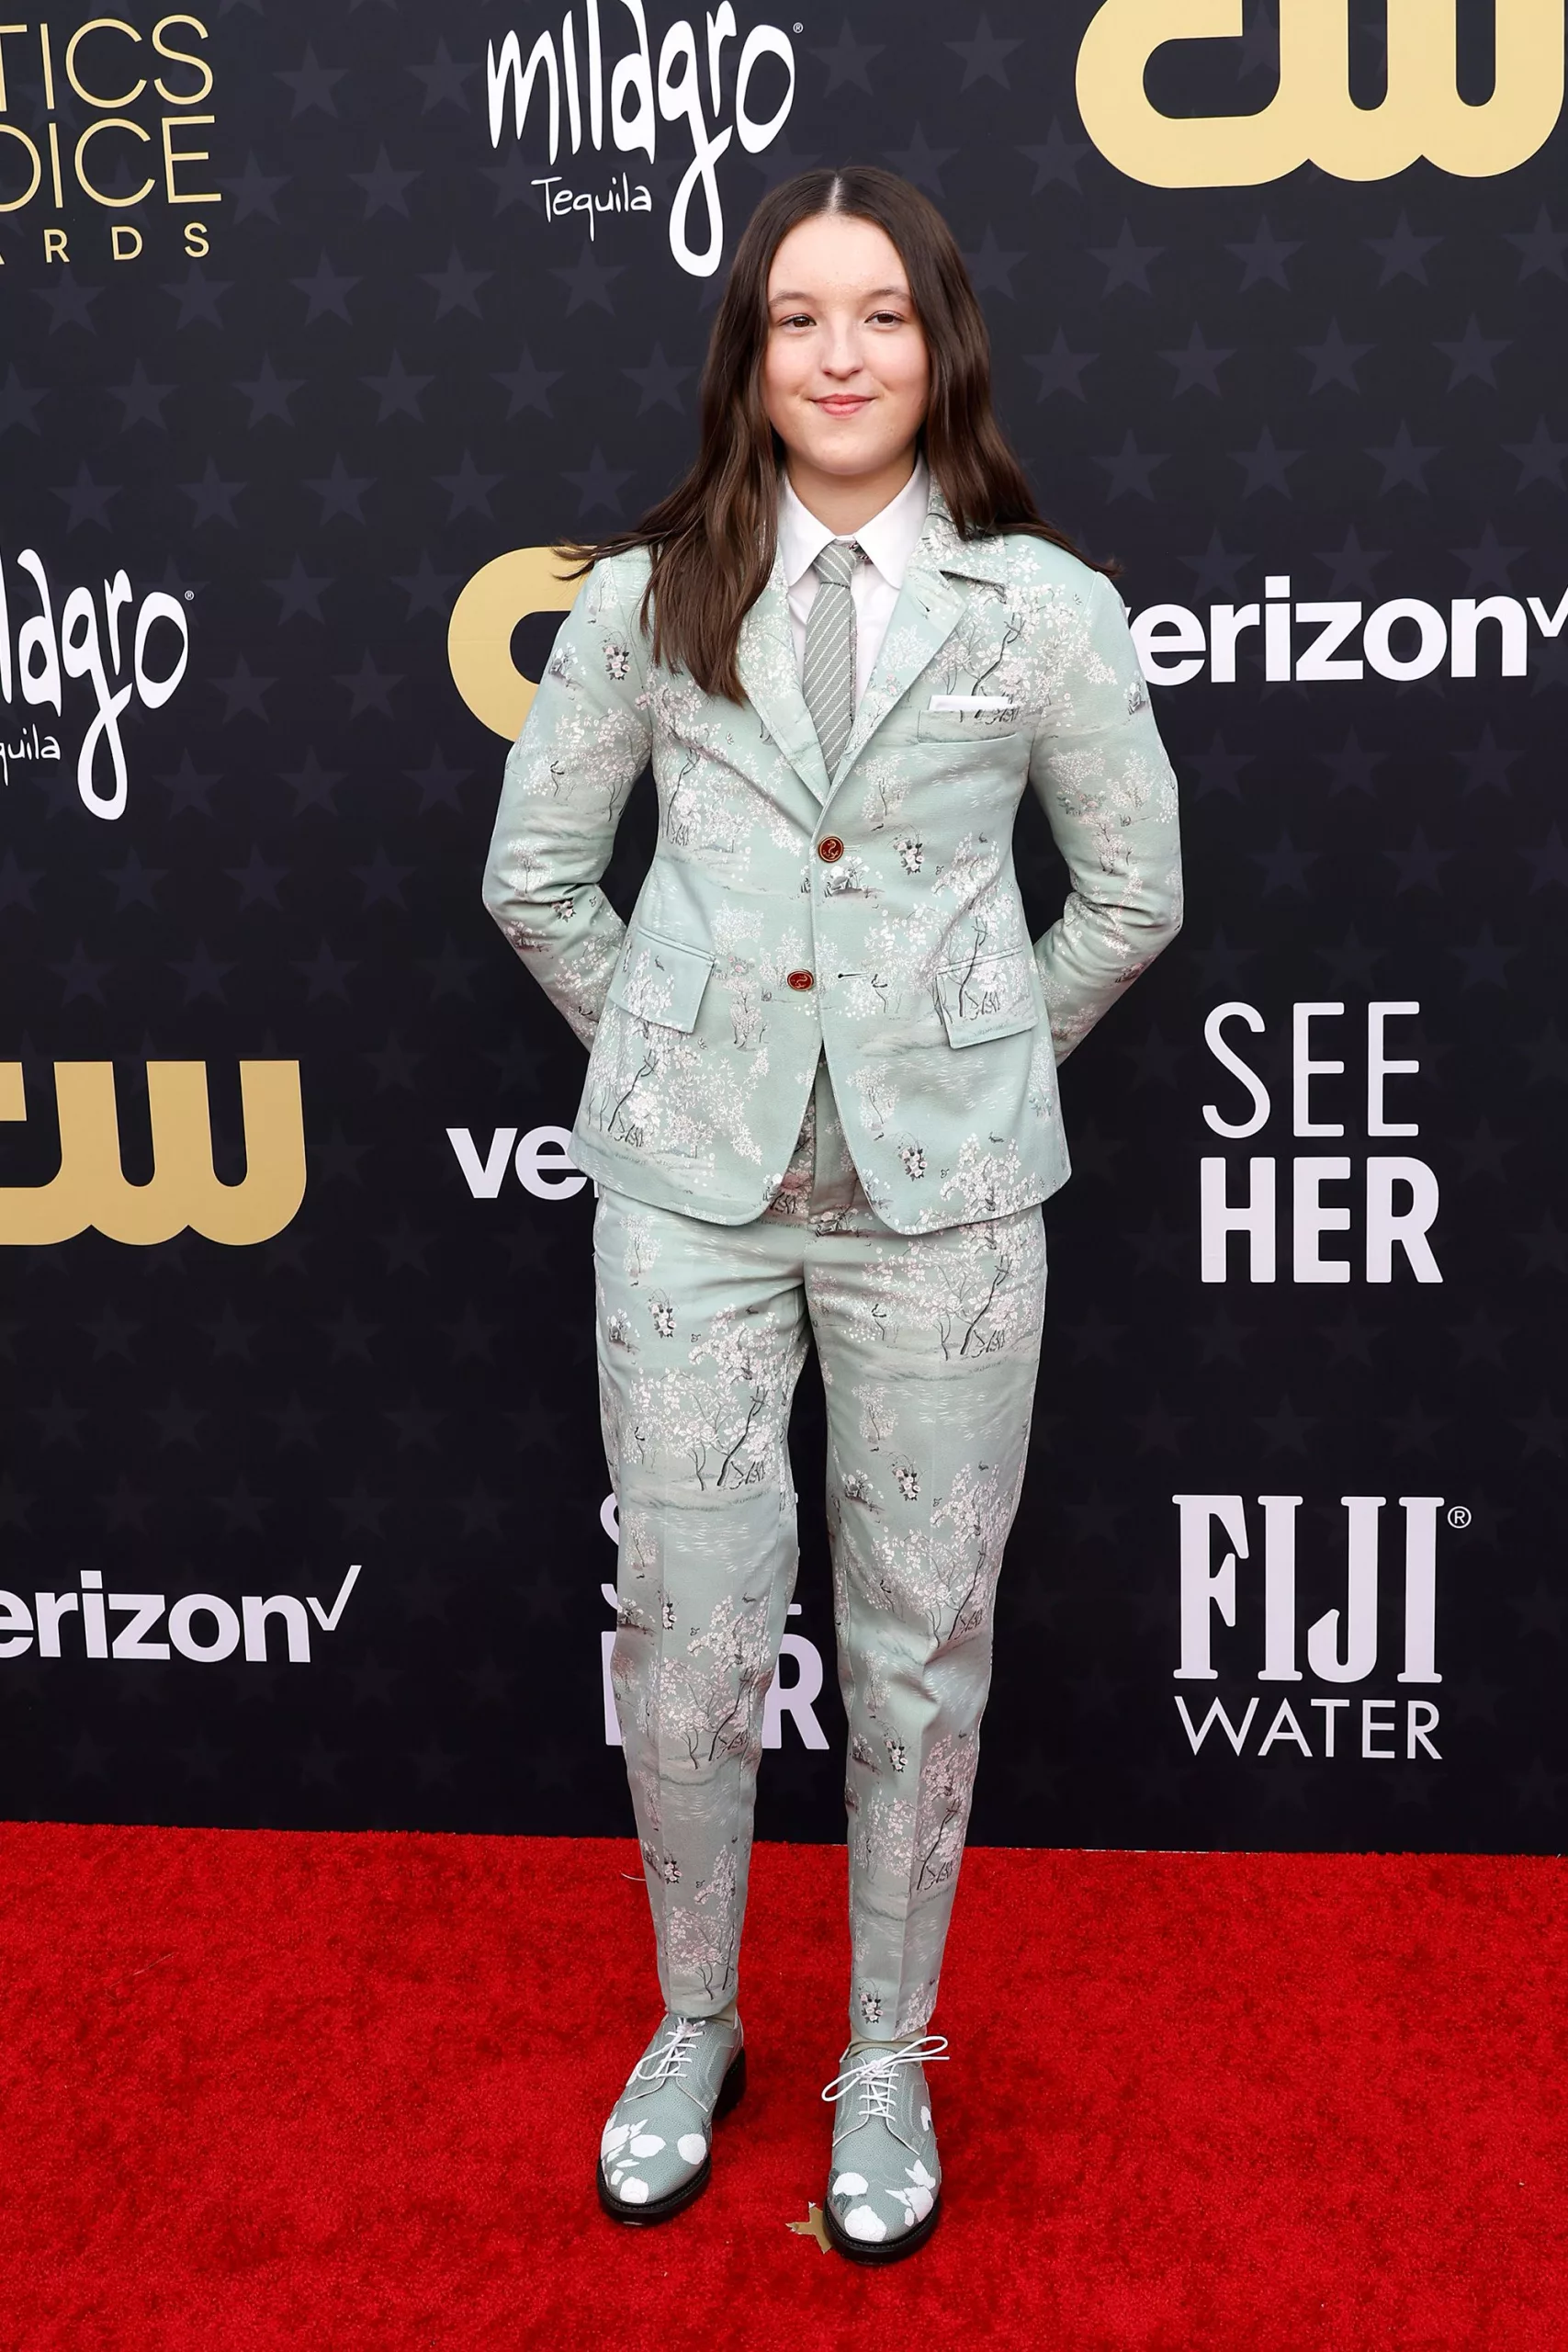 Nominated for her turn in “The Last of Us,” actress Bella Ramsey arrived in a mint-green Thom Browne suit with white blossom detailing and matching shoes.